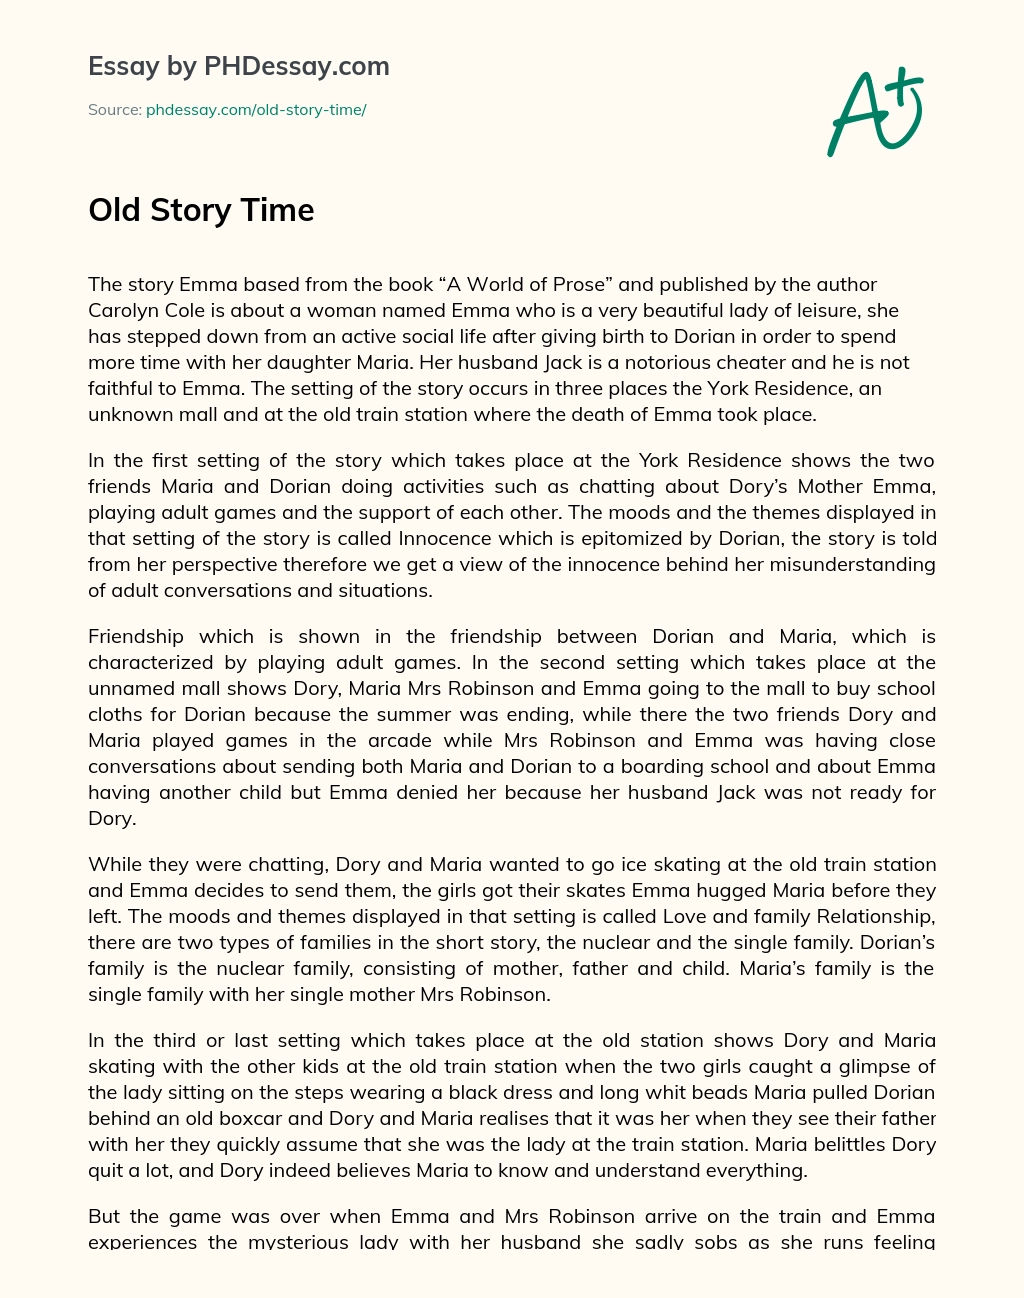 Old Story Time essay